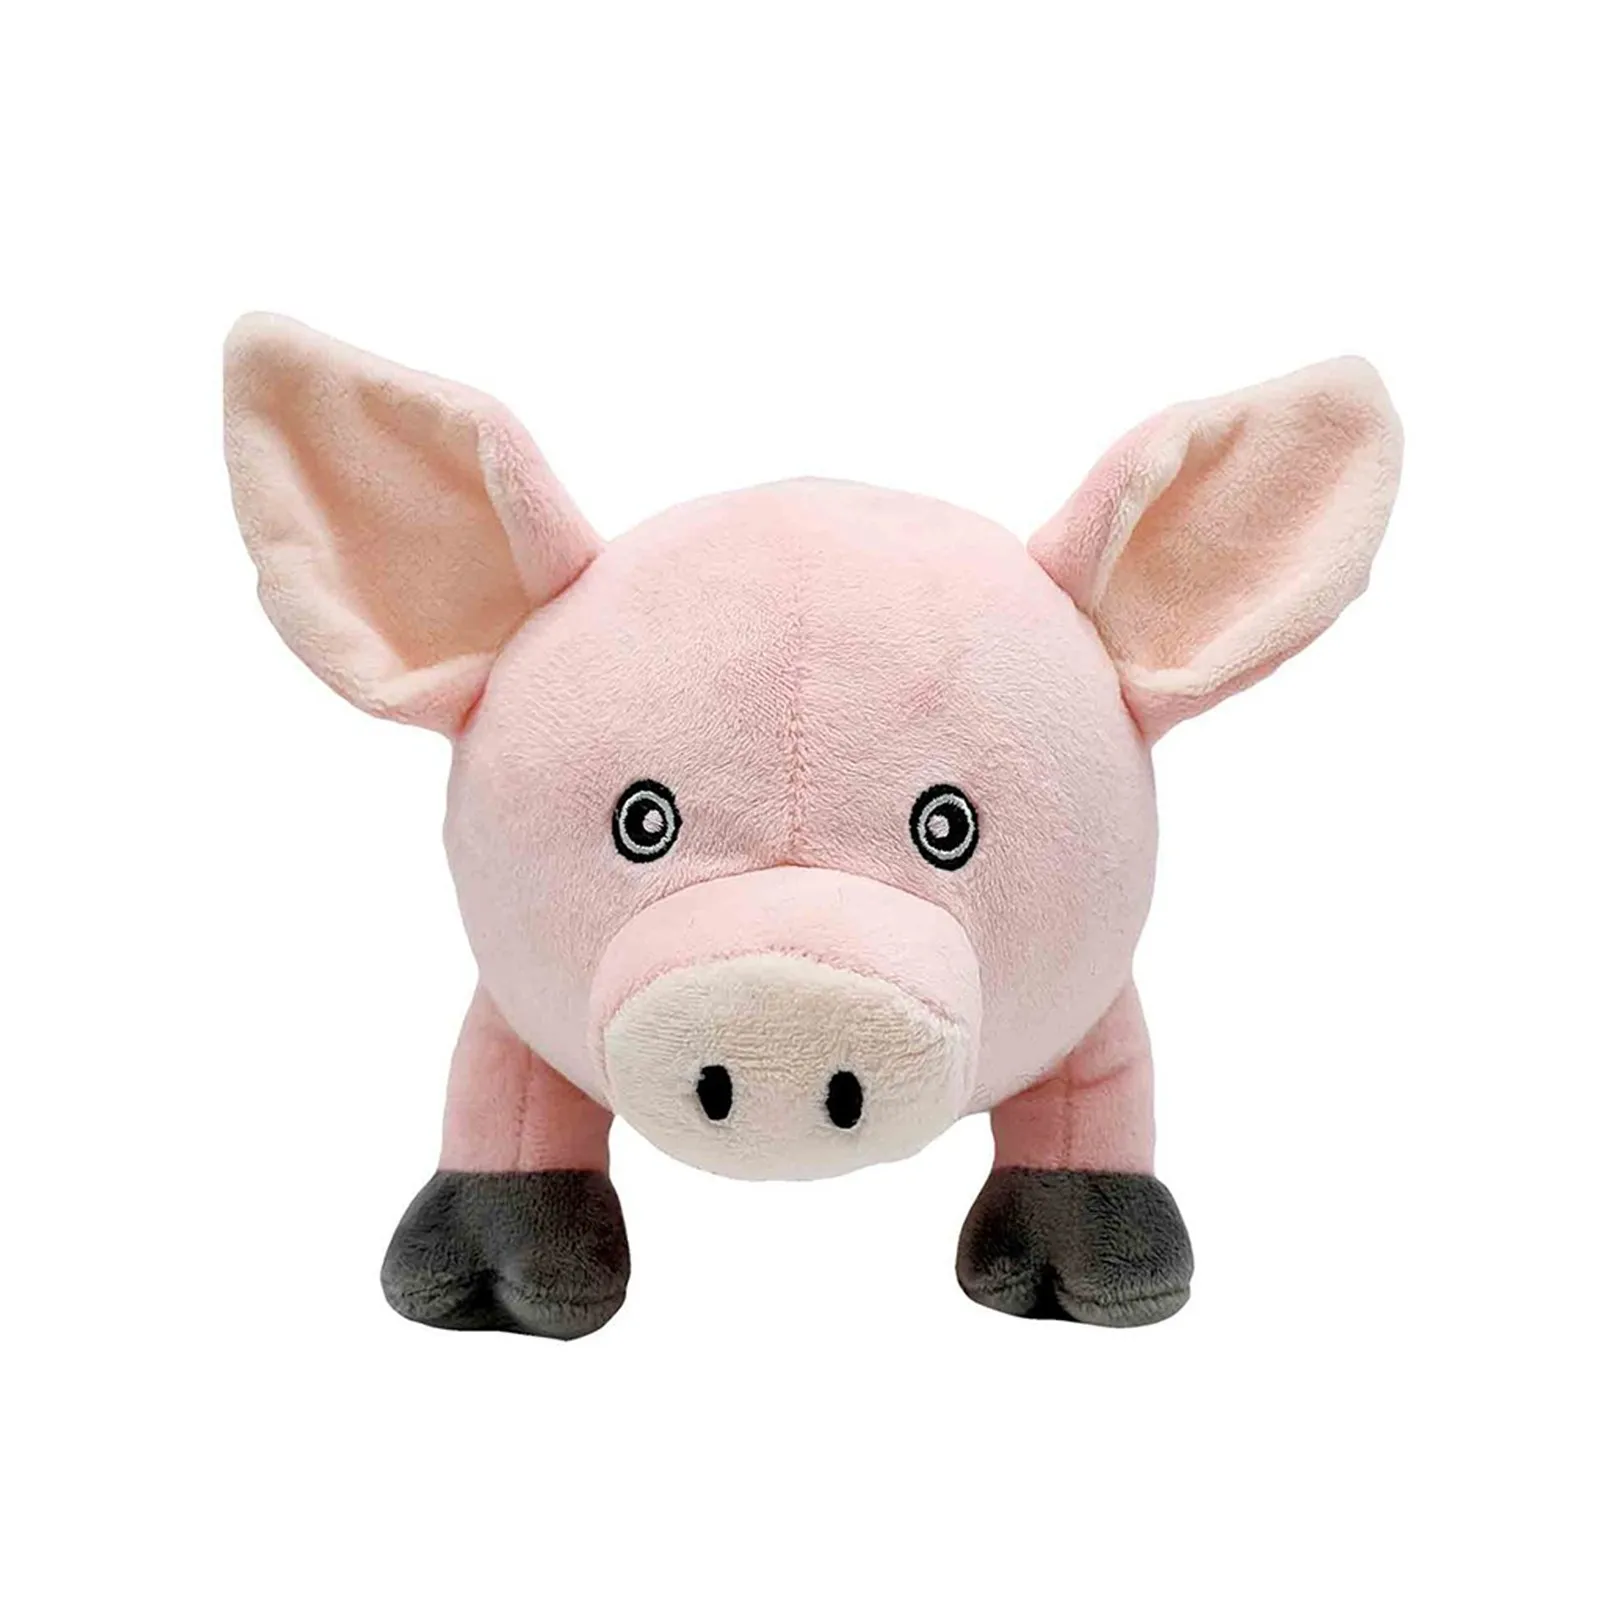 

Cute 20cm New Slumberland Pig Pink Plush Toys Around Pigs Holiday Gifts For Boys And Girls Birthday Gifts Home Decoration